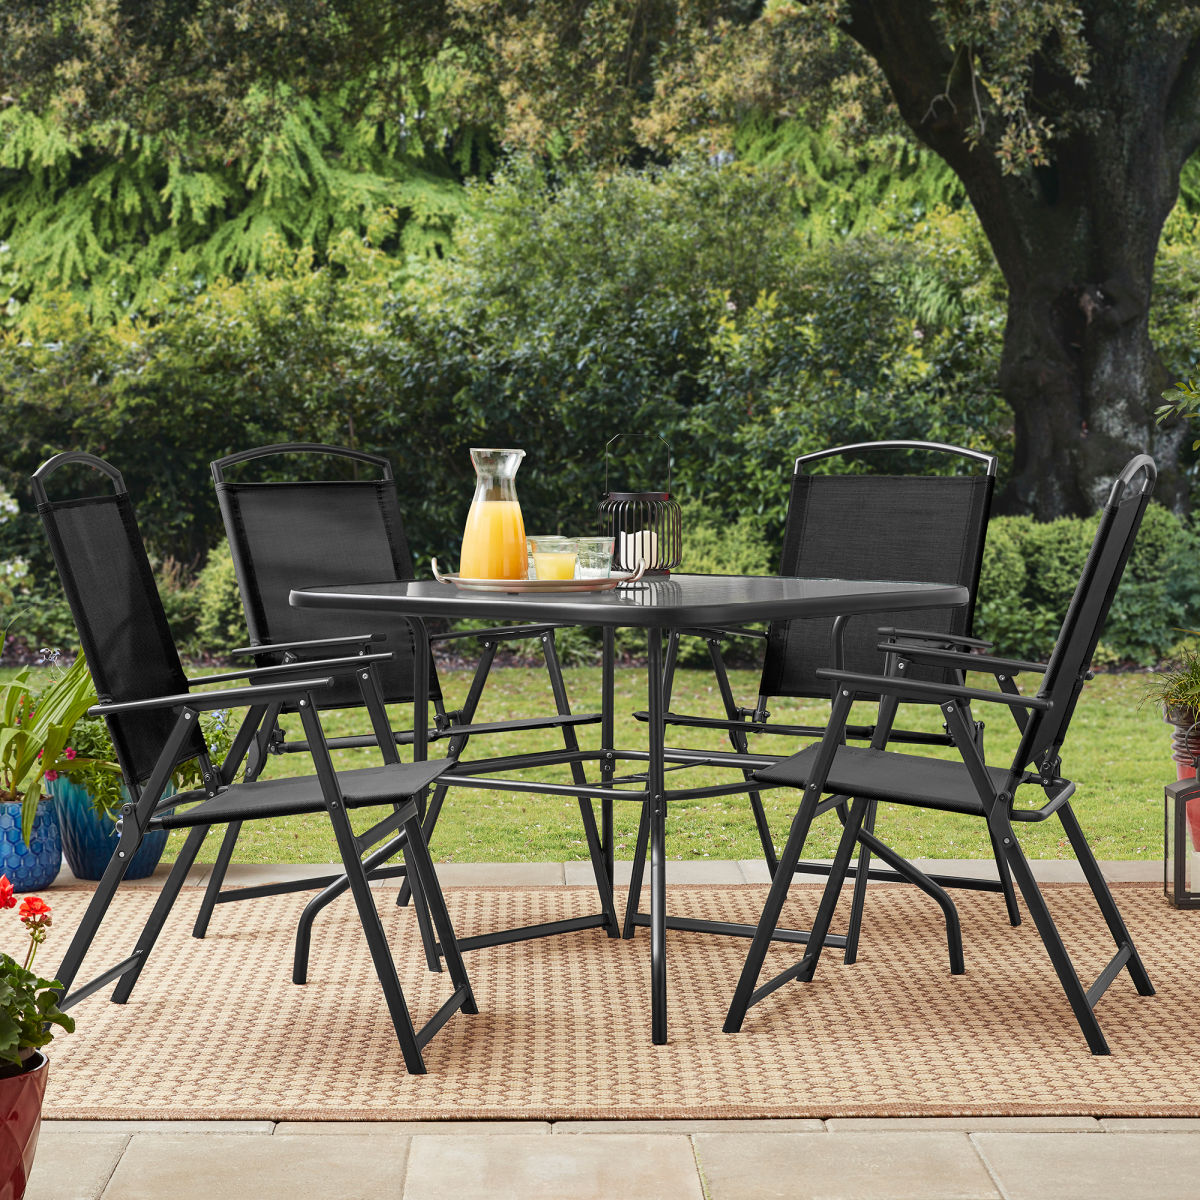 Mainstays Albany Lane Outdoor Patio 5-Piece Dining Set